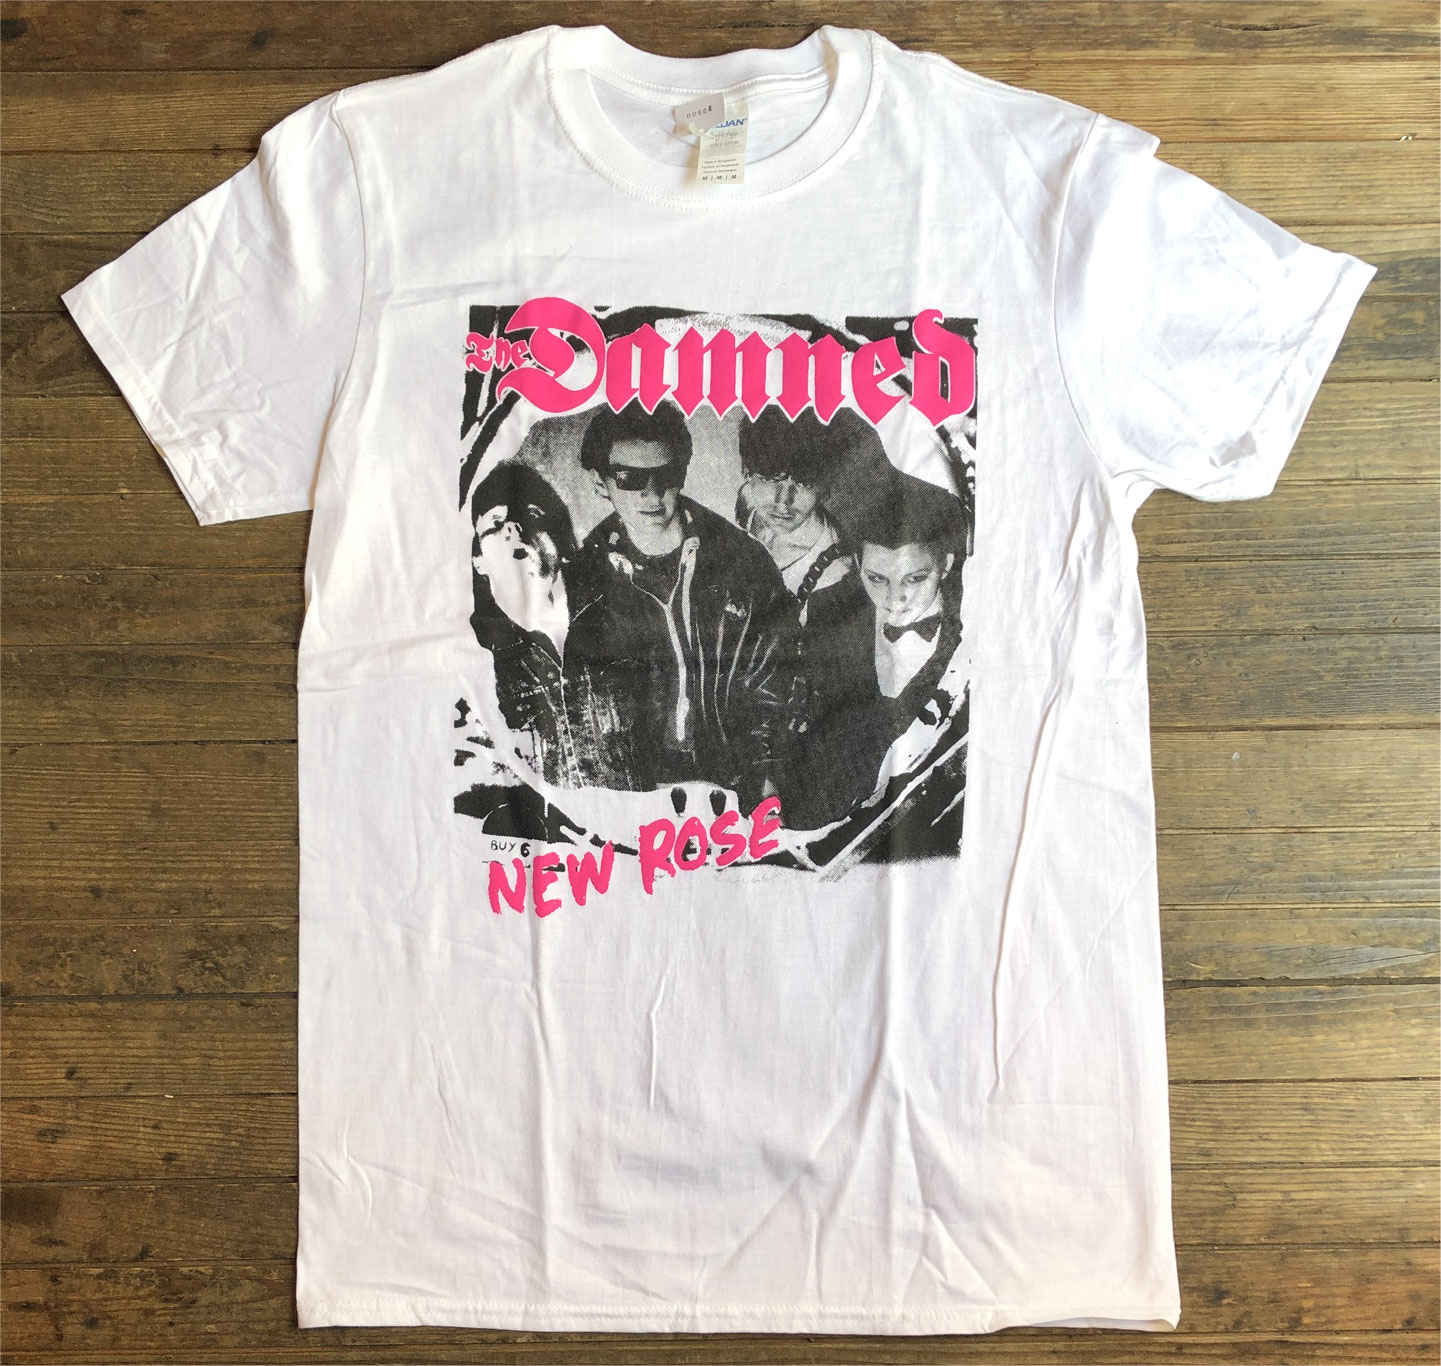 THE DAMNED Tシャツ NEW ROSE